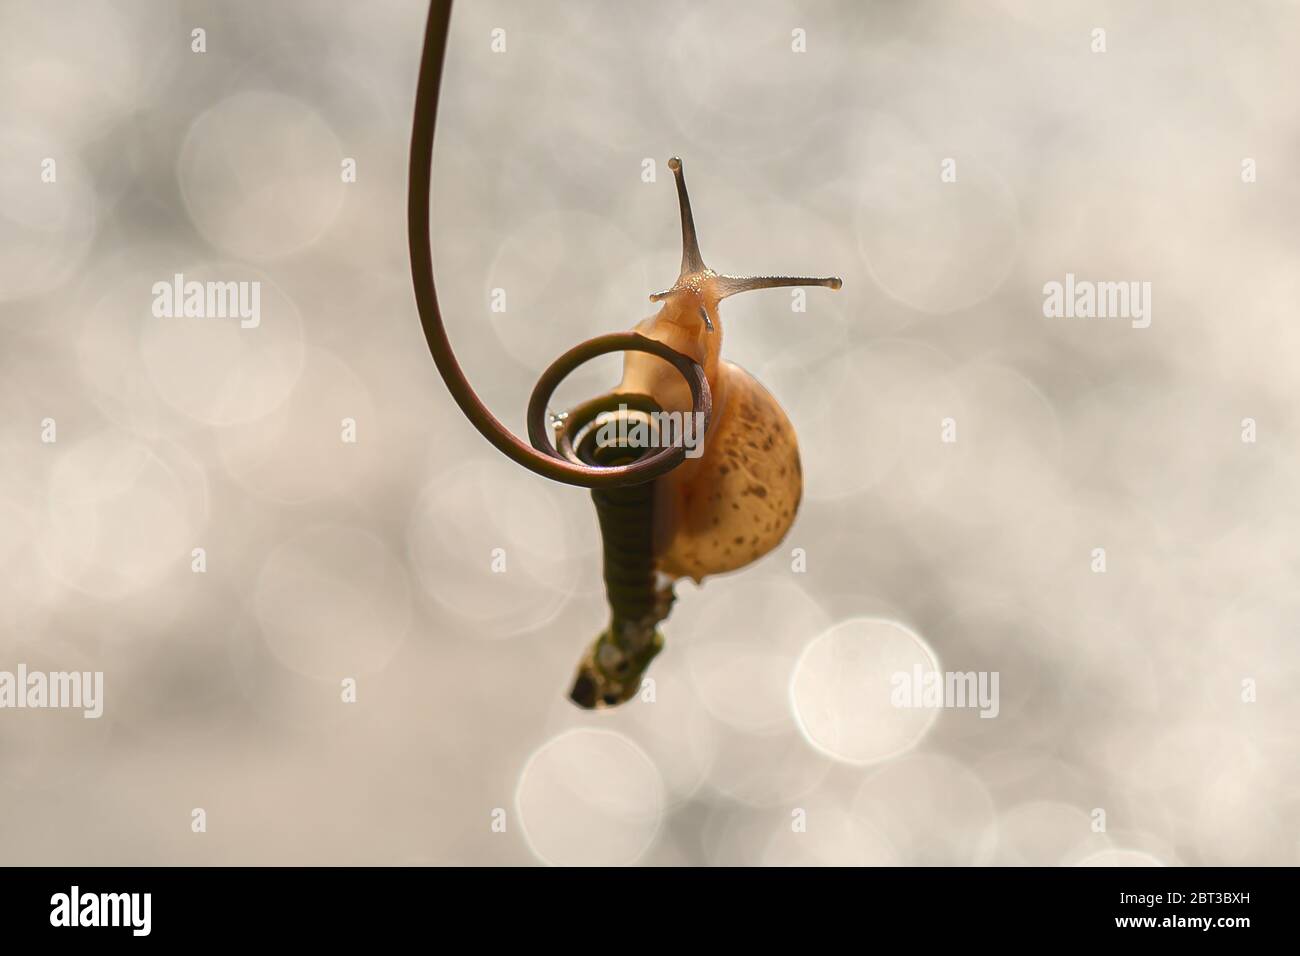 Miniature snail on a plant, Indonesia Stock Photo